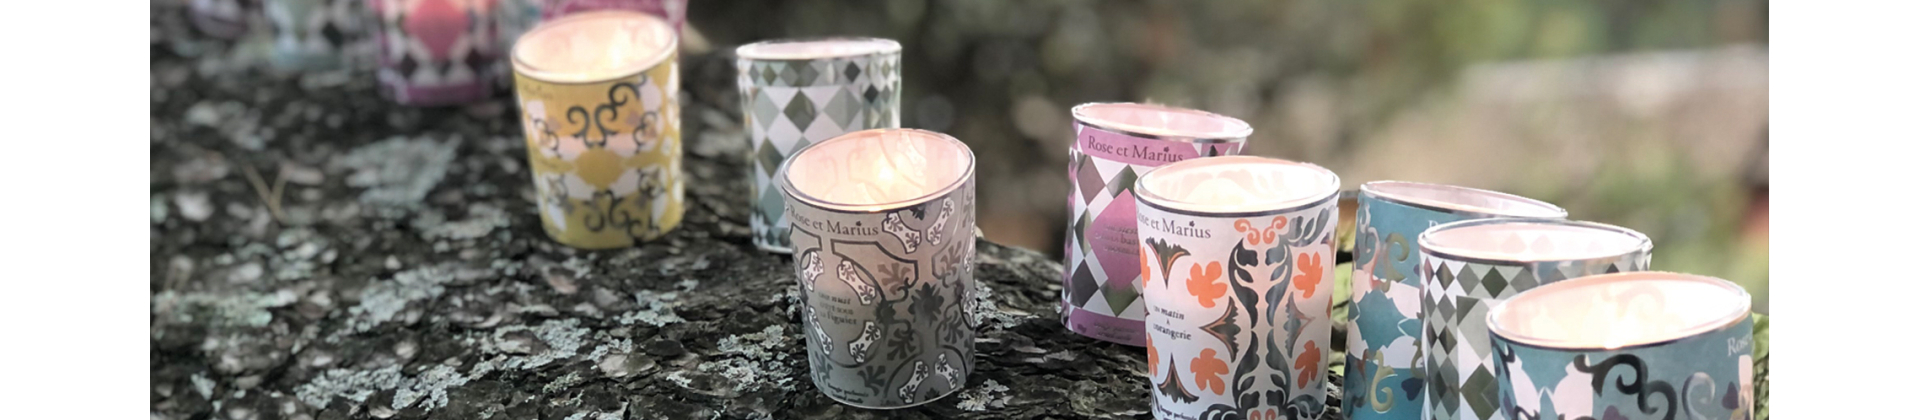 Mini scented candles